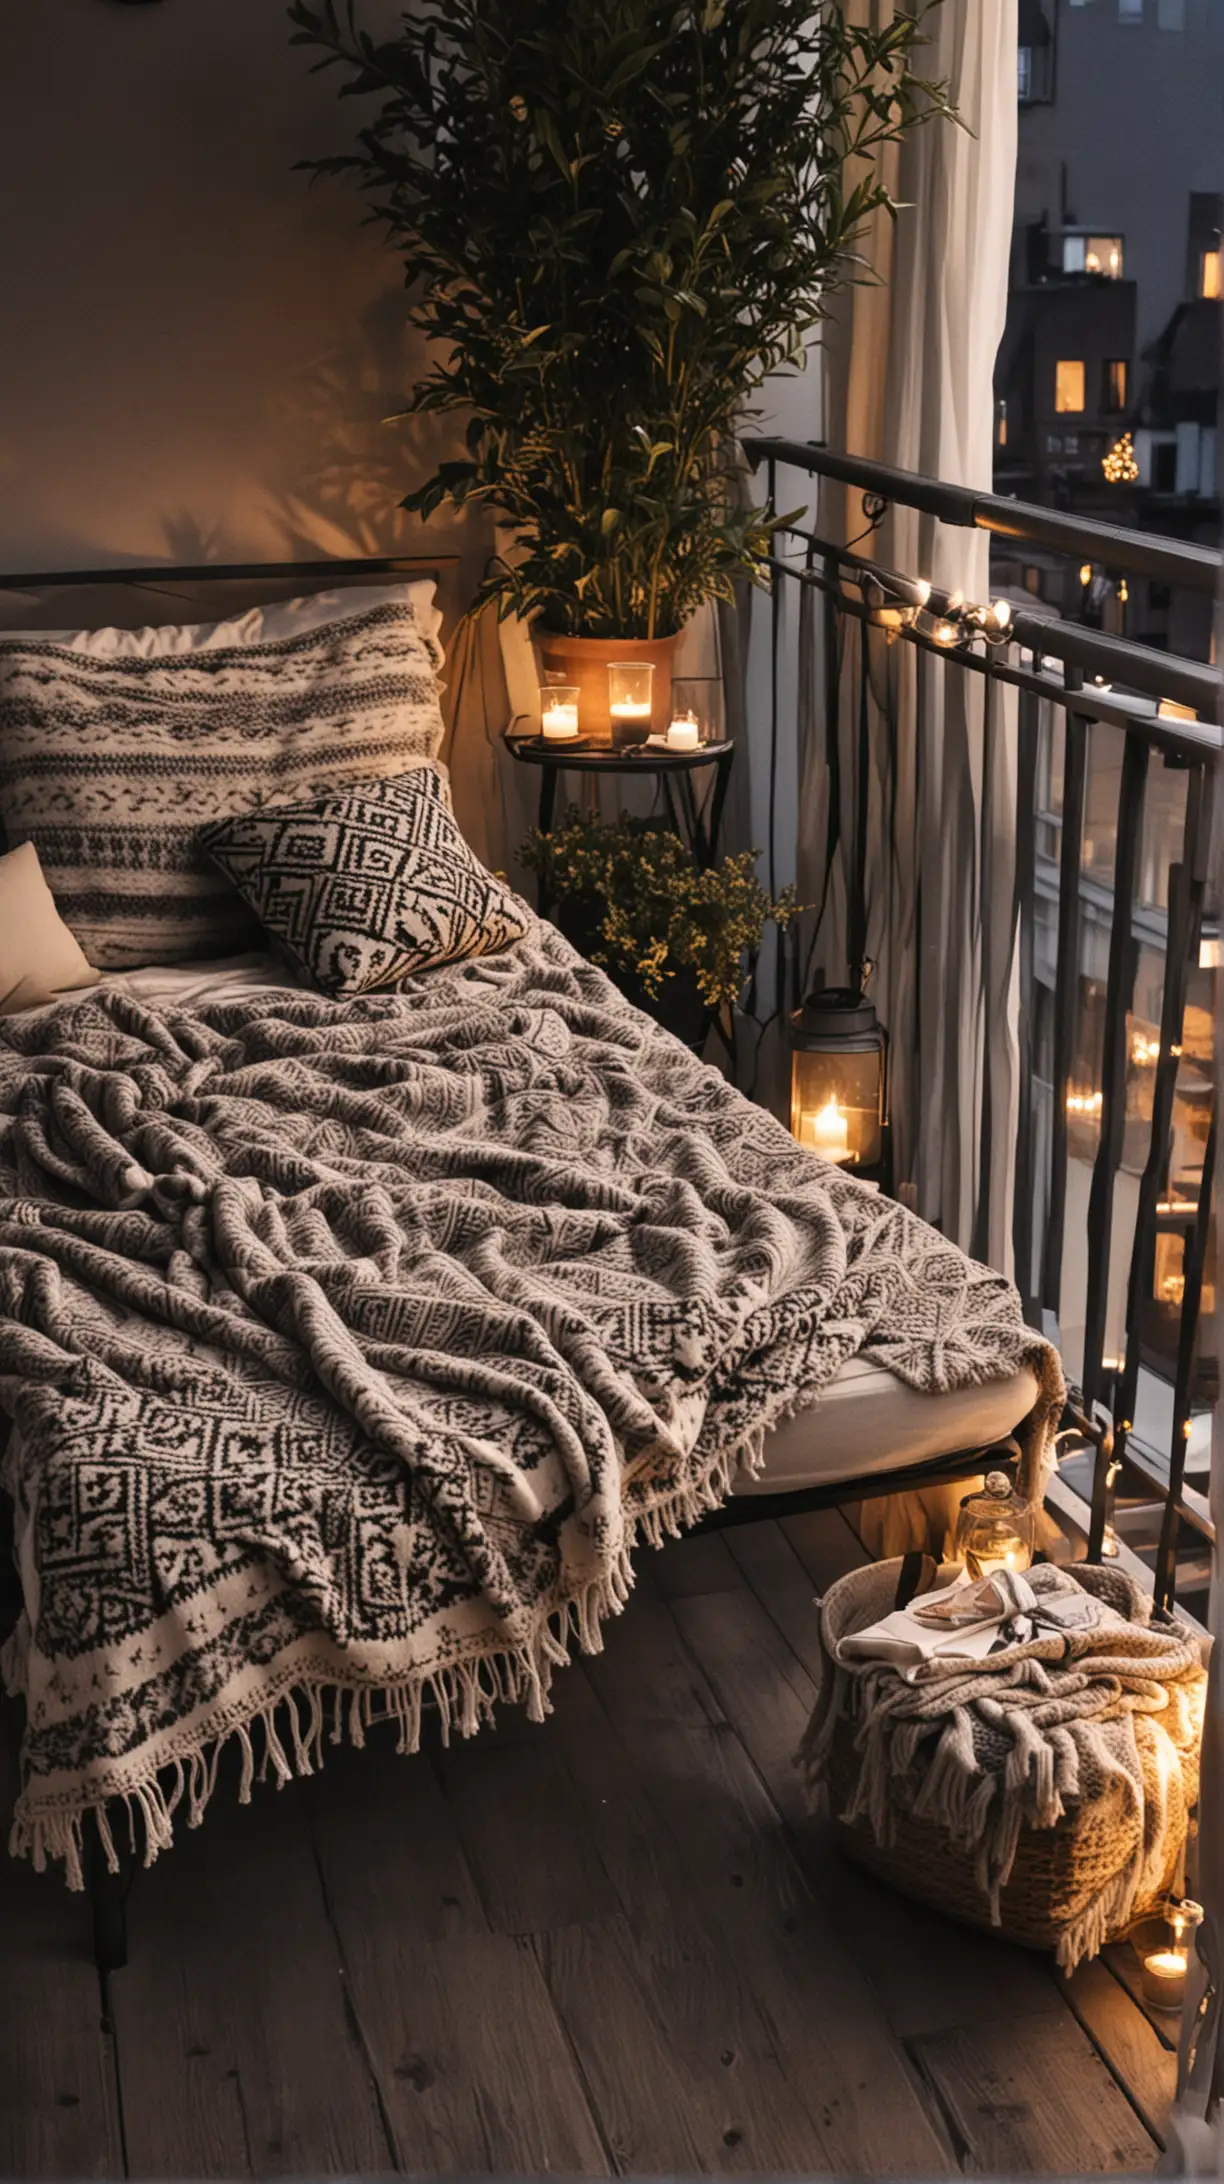 Cozy balcony setup with layered blankets in various patterns, ready for a chilly evening.